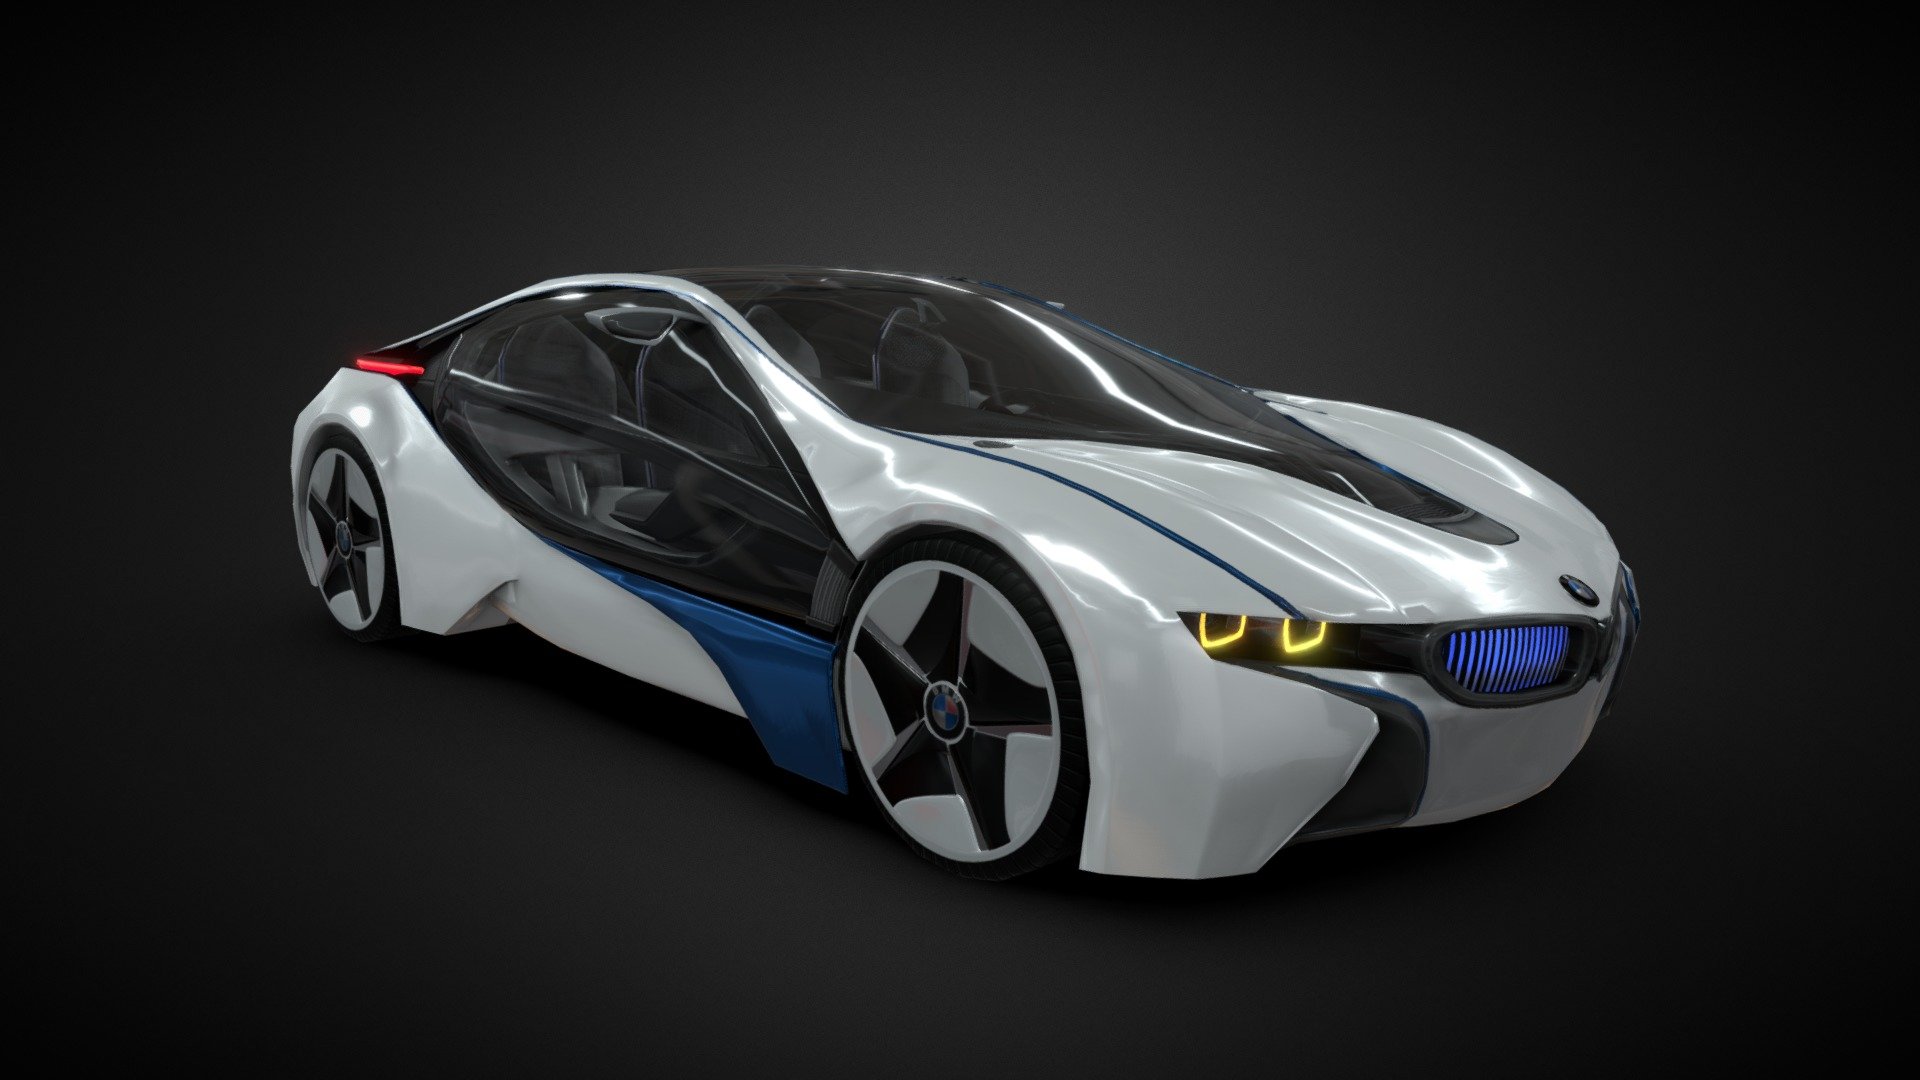 BMW i8 Vision Efficient Dynamics PBR low-poly 3d model ready for Games Single Material ,PBR shaders 6k polycount

Unity Package Ready games and other real-time apps.

SPECS

Model is set of separated Objects easy to customize
Model Has real-world Scale and is centered at 0,0,0,
Preview images Realtime rendered
All textures Optimized 4K in one Set
Mesh file Optimized fbx 545 kbyte
Texture dimensions:

1 set of 4k (diffuse and Normal &amp; AO-metalness- roughness ) - BMW i8 Vision Efficient VR - 3D model by Mass (@masood3d) 3d model